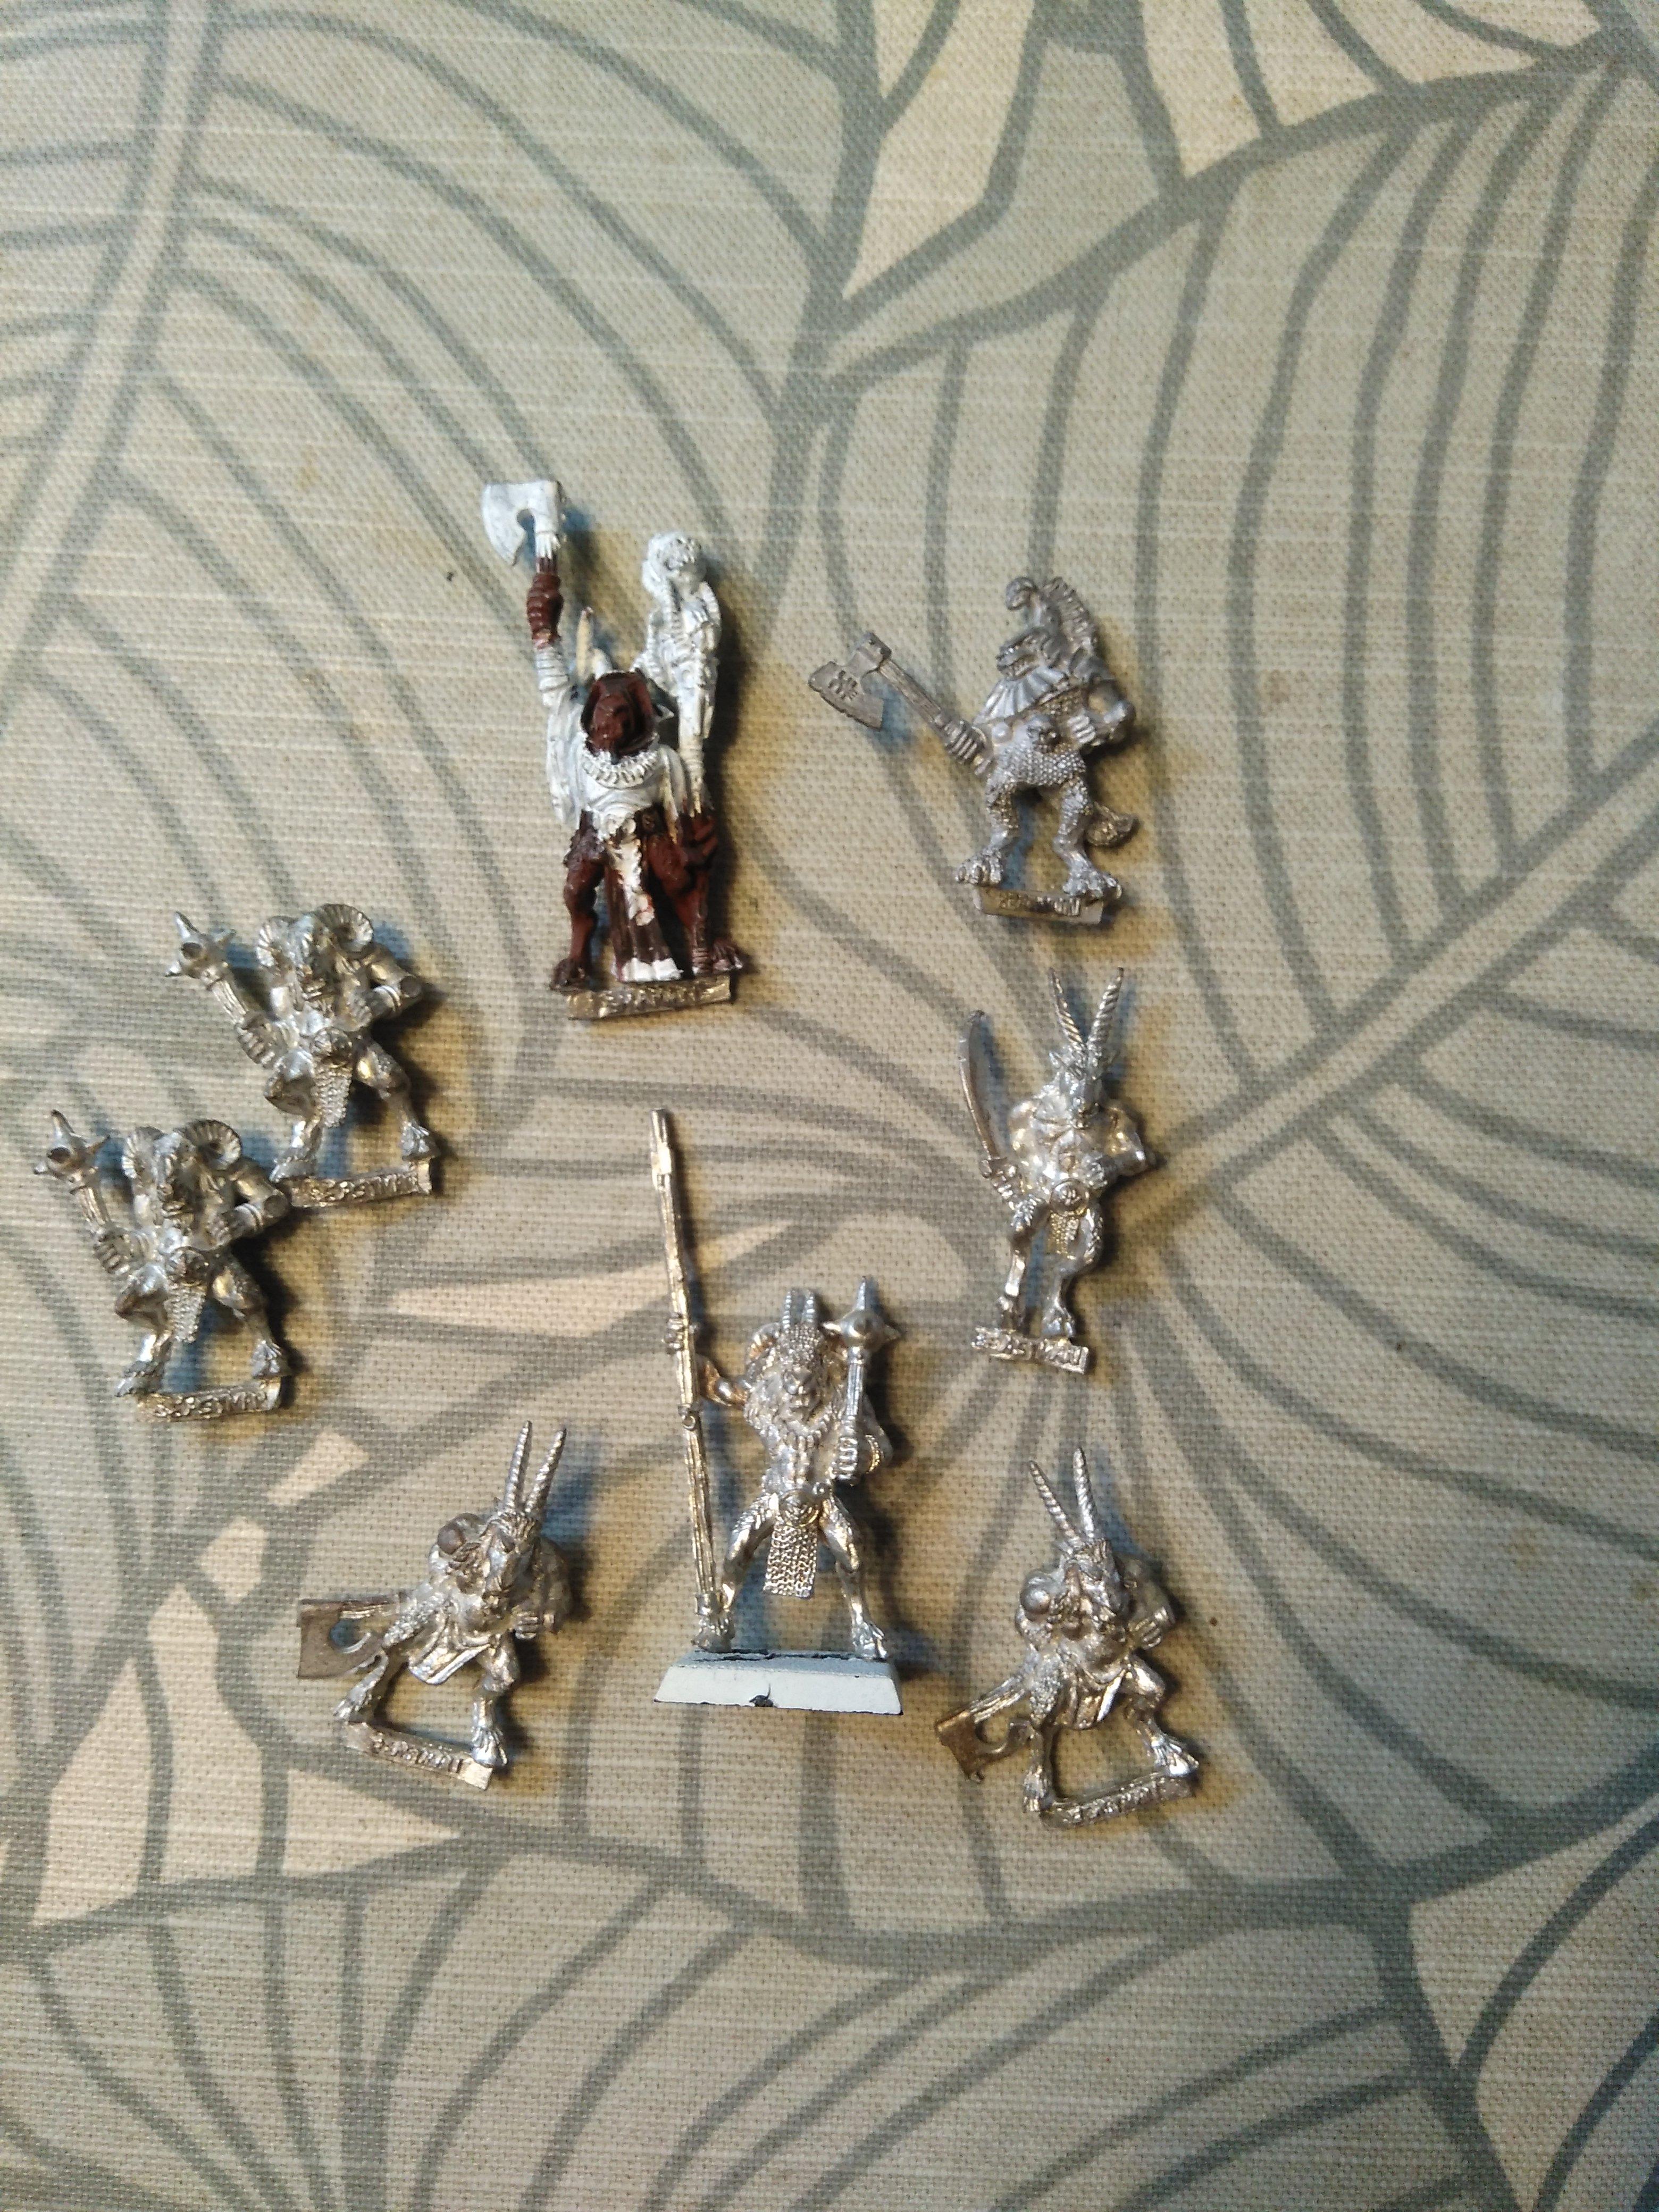 Beastmen, Chaos, Citadel, January 2022, Middlehammer, Oldhammer, Realms If Chaod